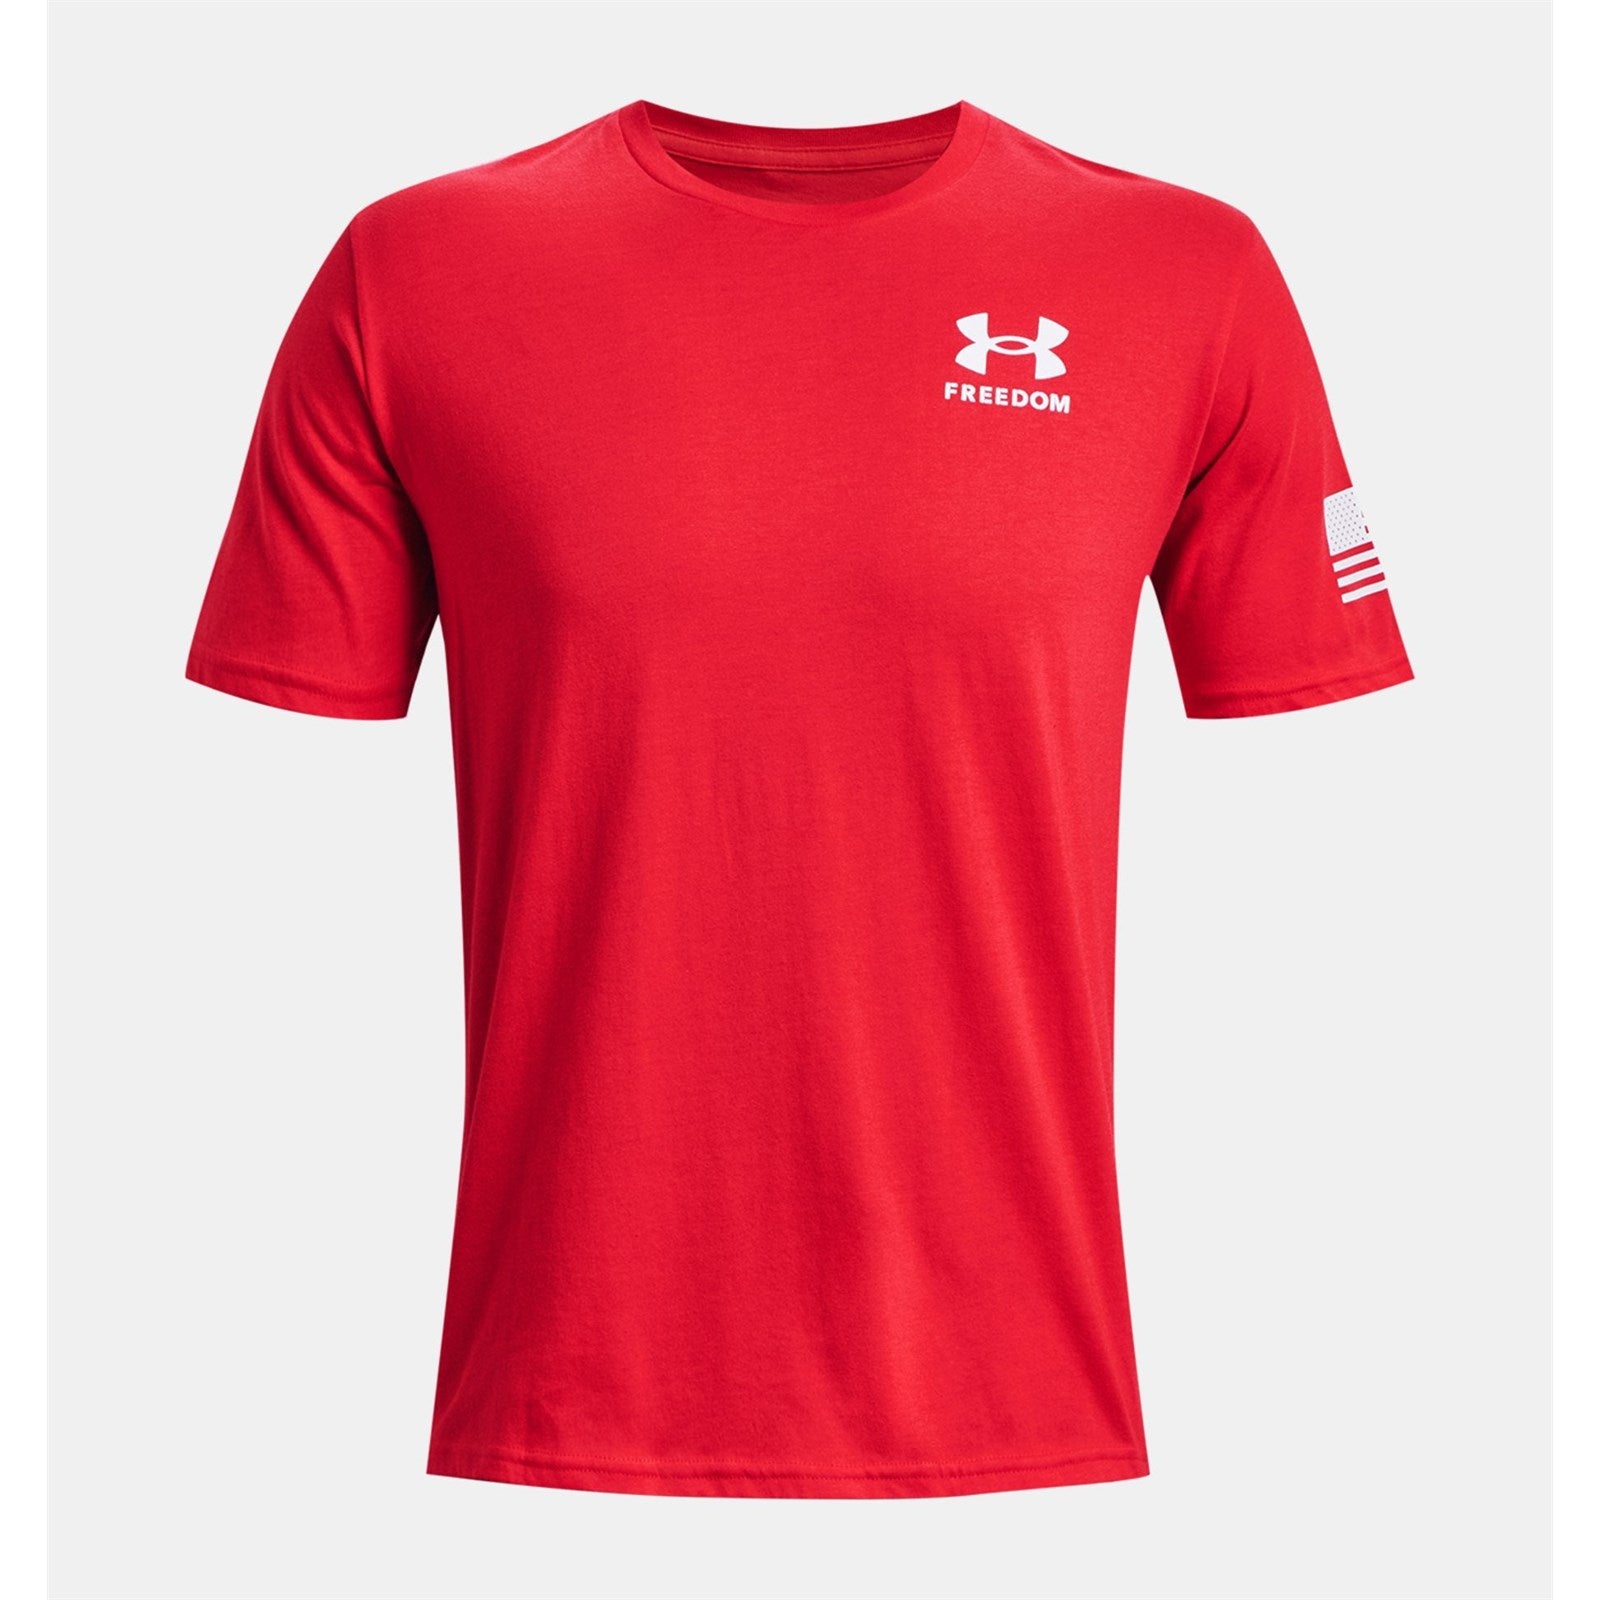 Under Armour Men New Freedom Flag T-Shirt